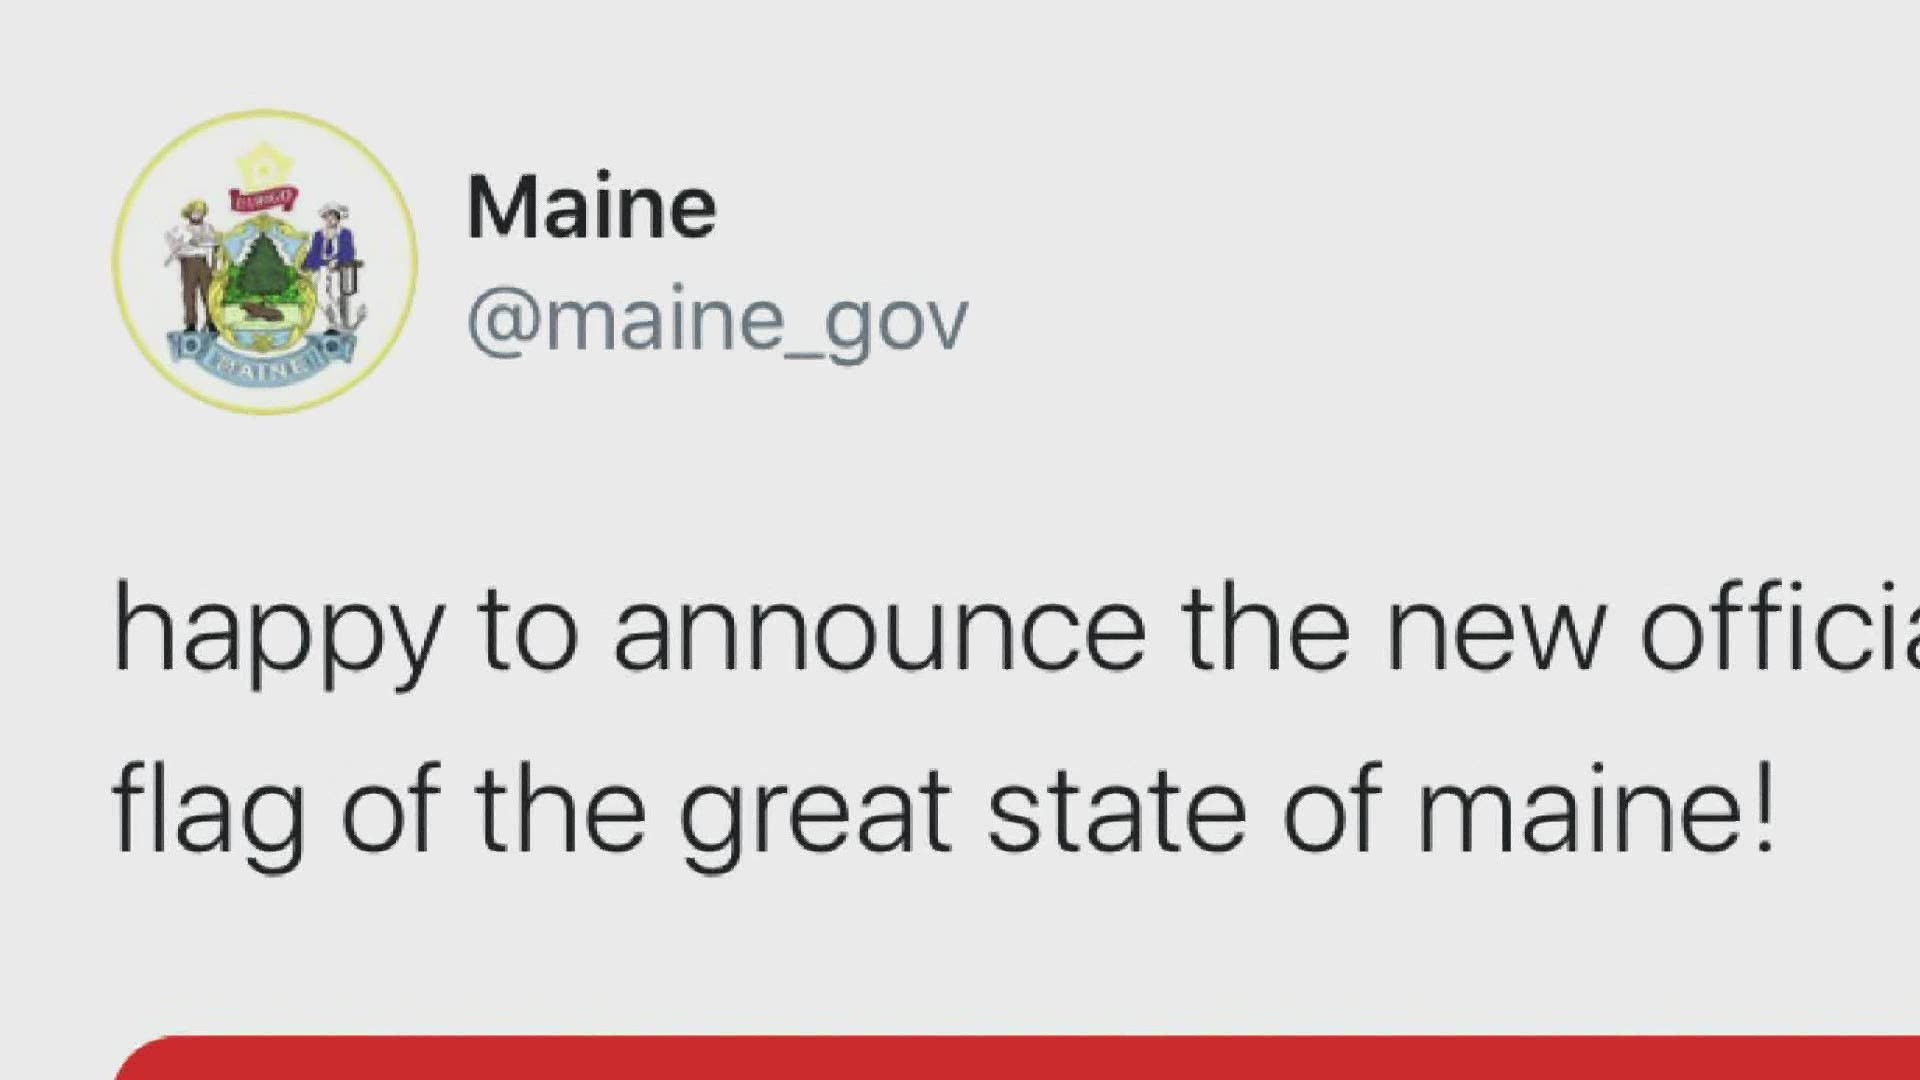 Maine parody account gets clicks for tweet about 'new official flag'